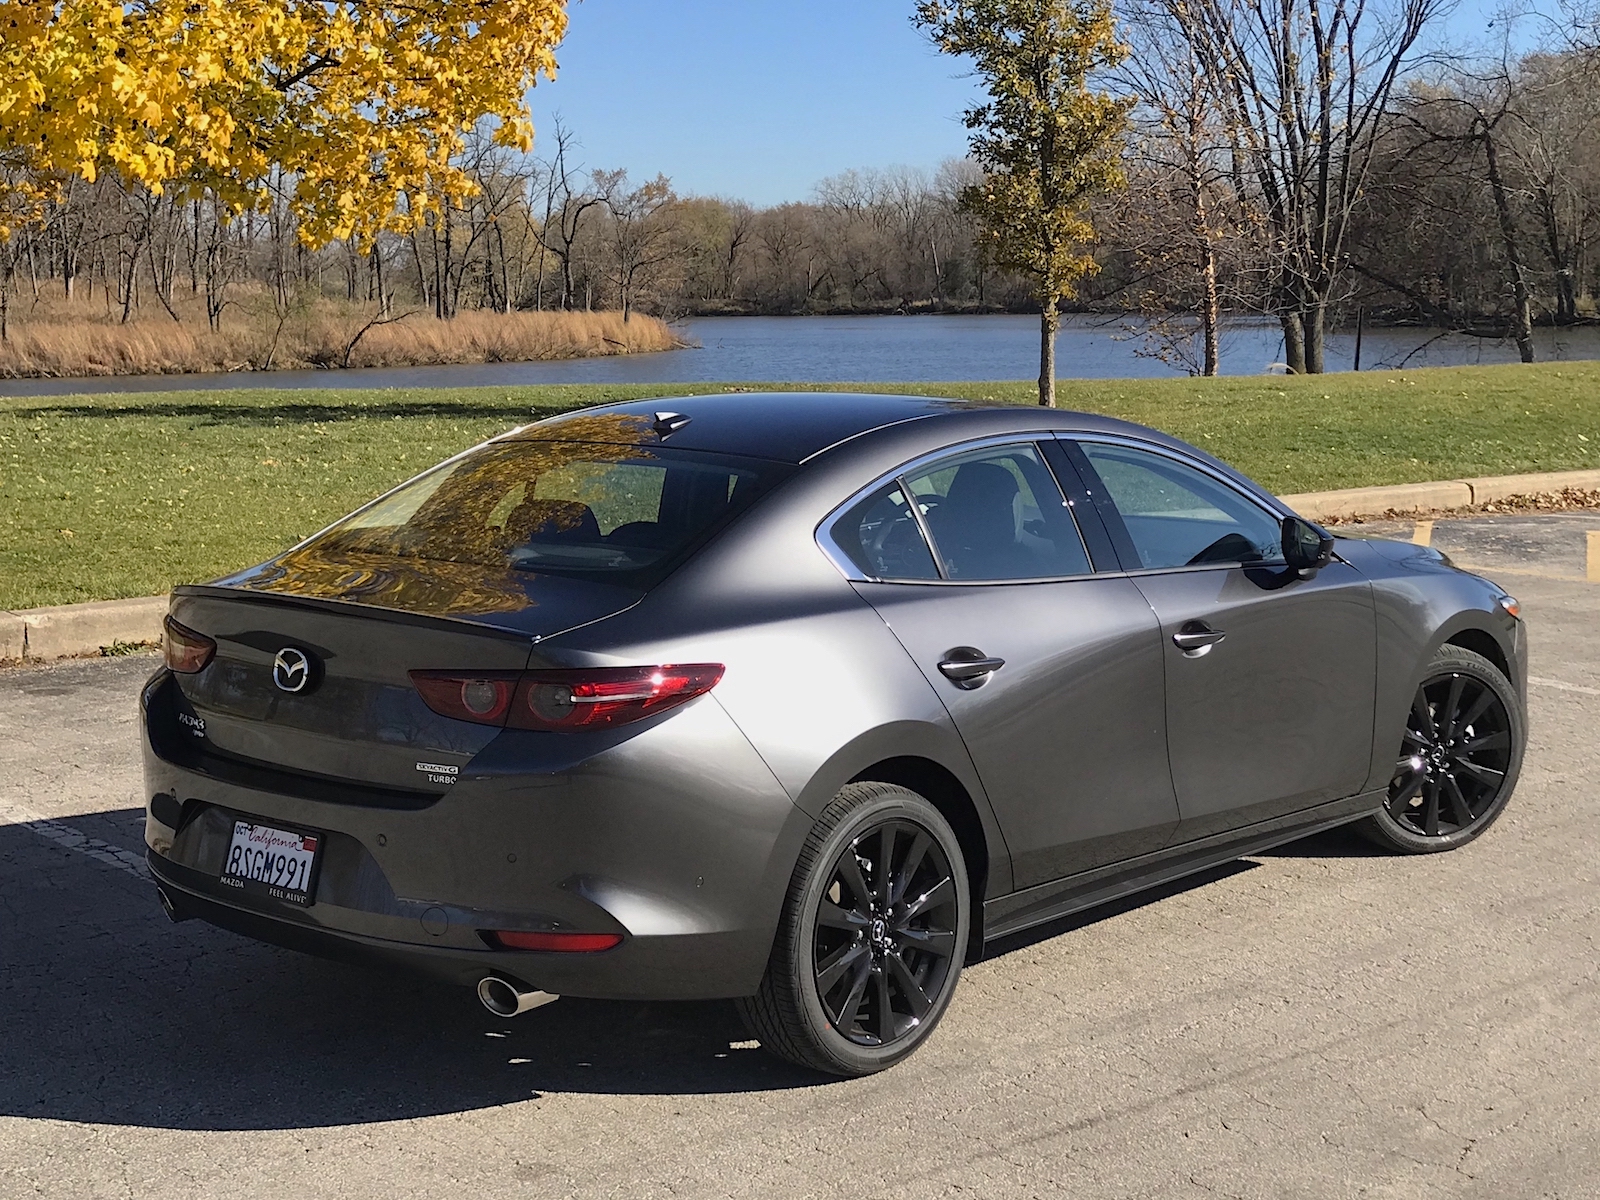 First drive review: The 2021 Mazda 3 2.5 Turbo moves with maturity